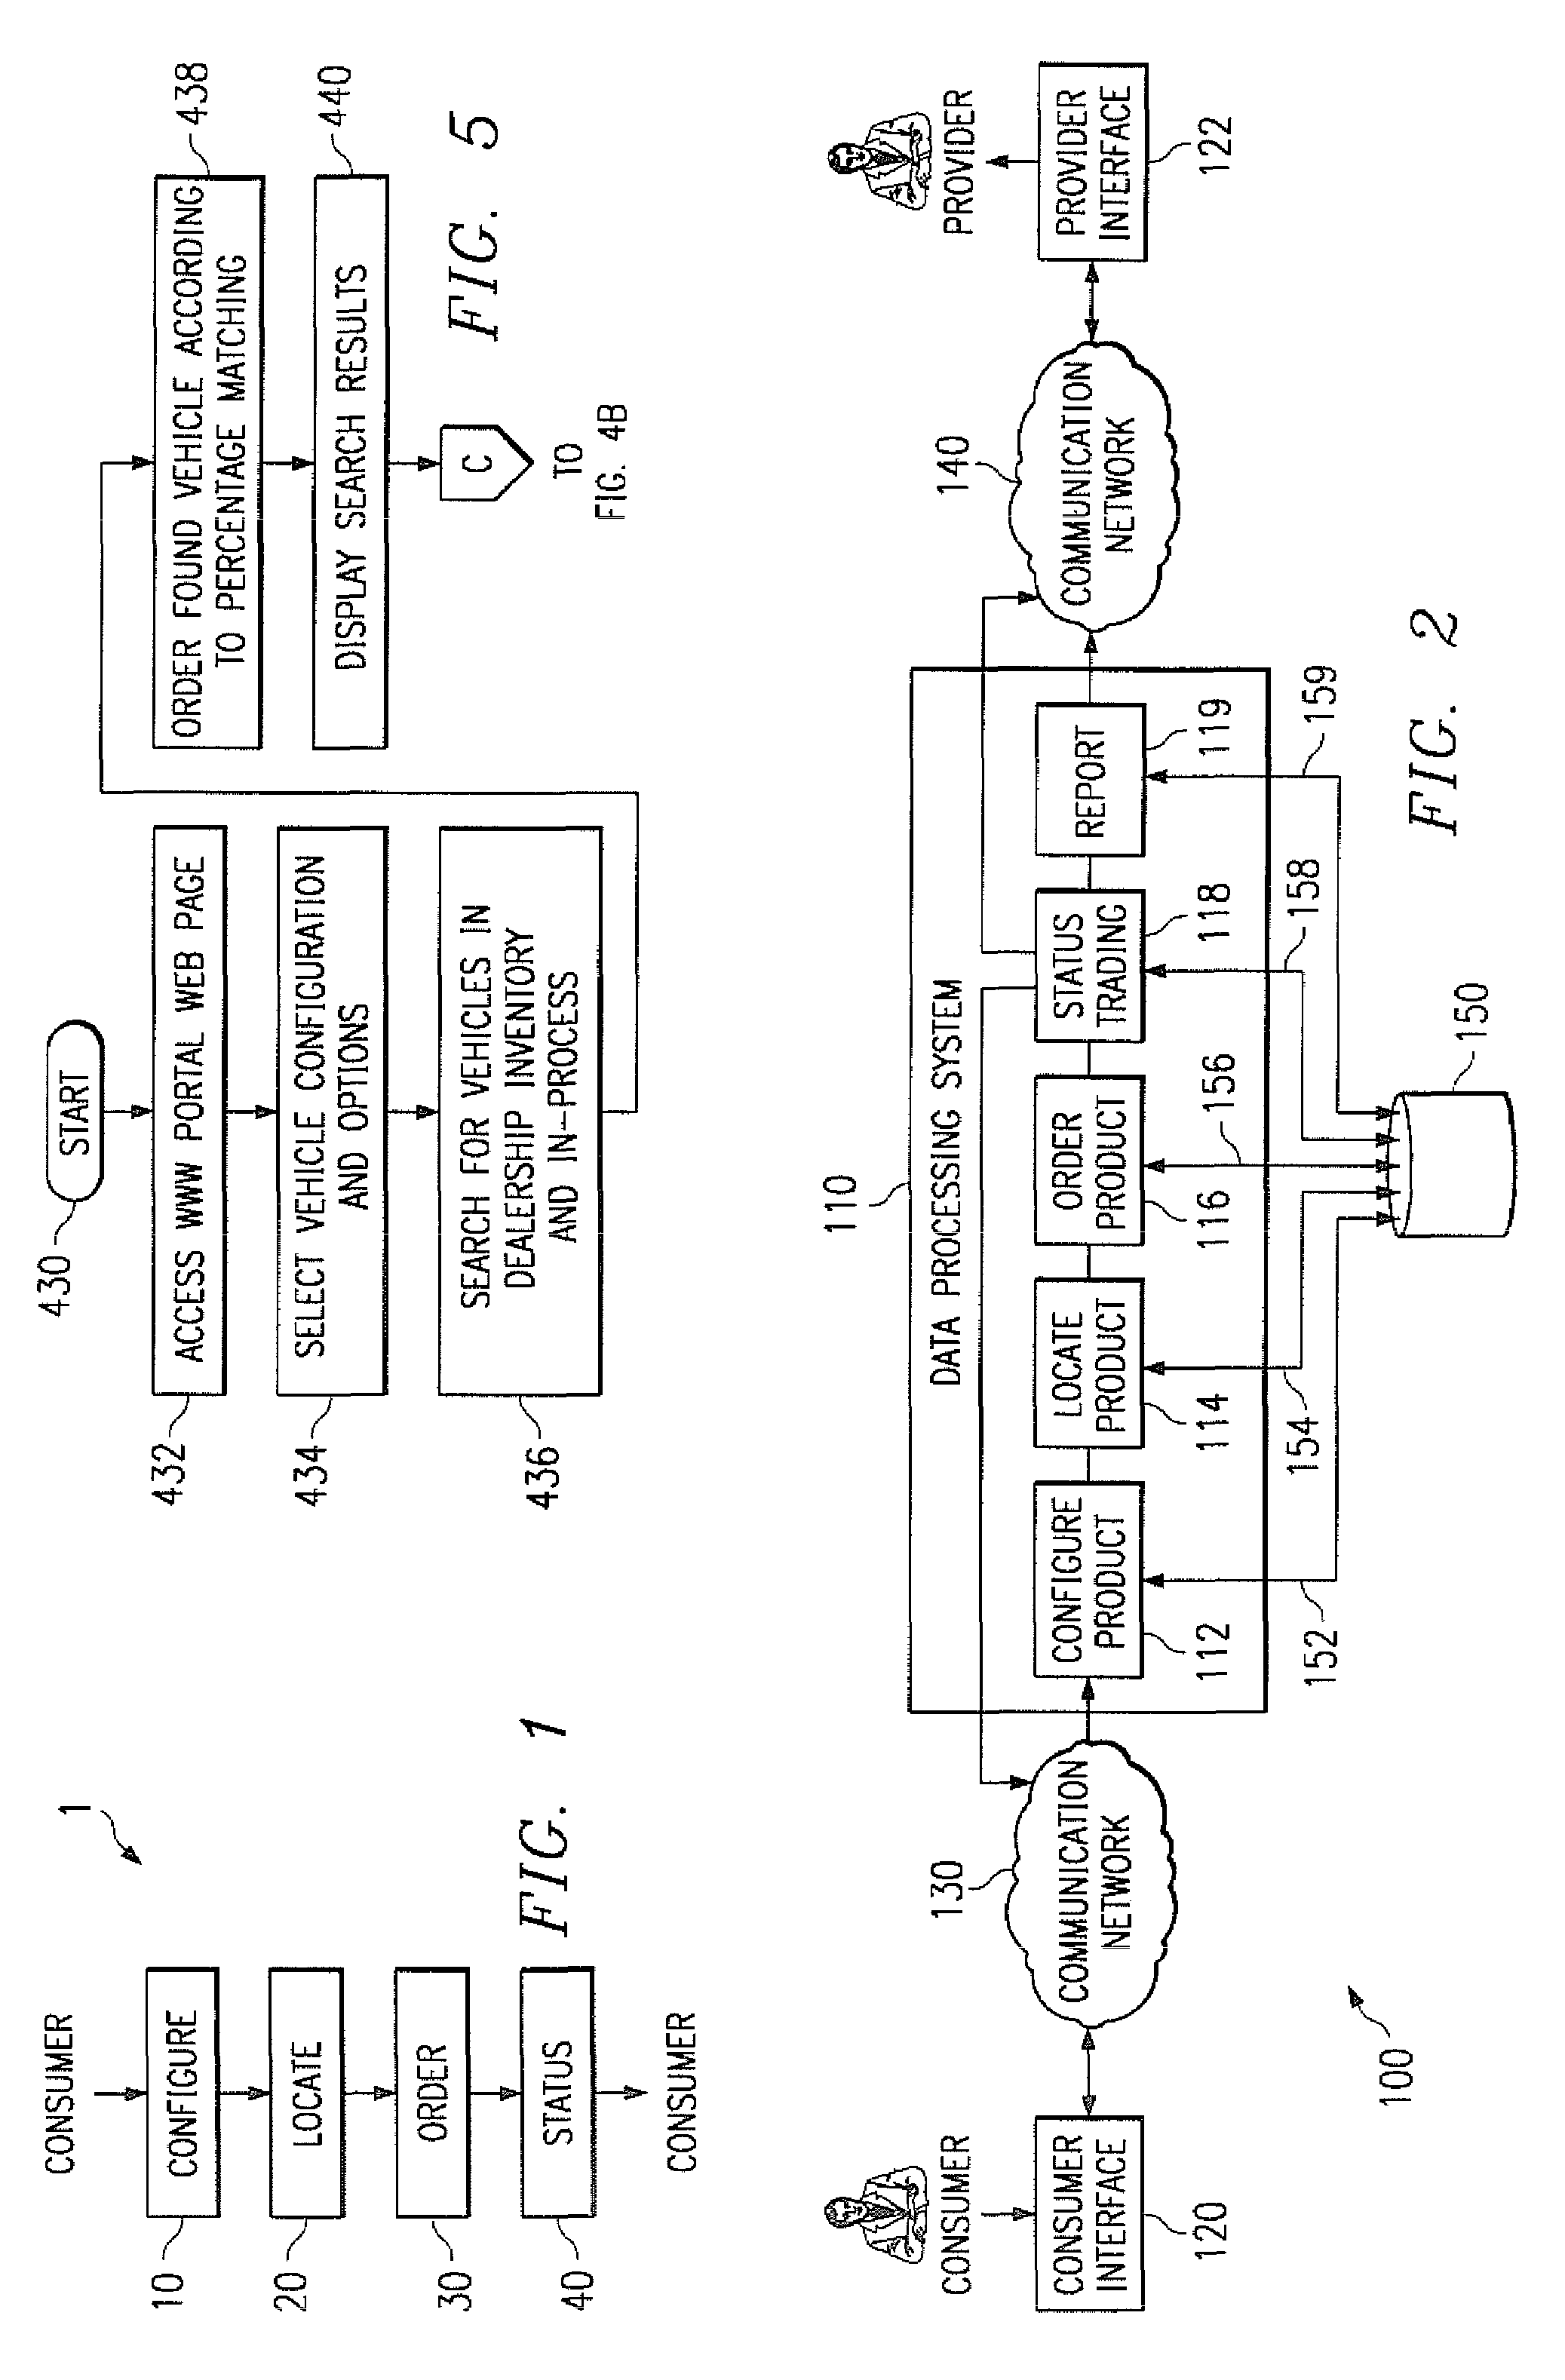 Method and system for configuring and ordering consumer product